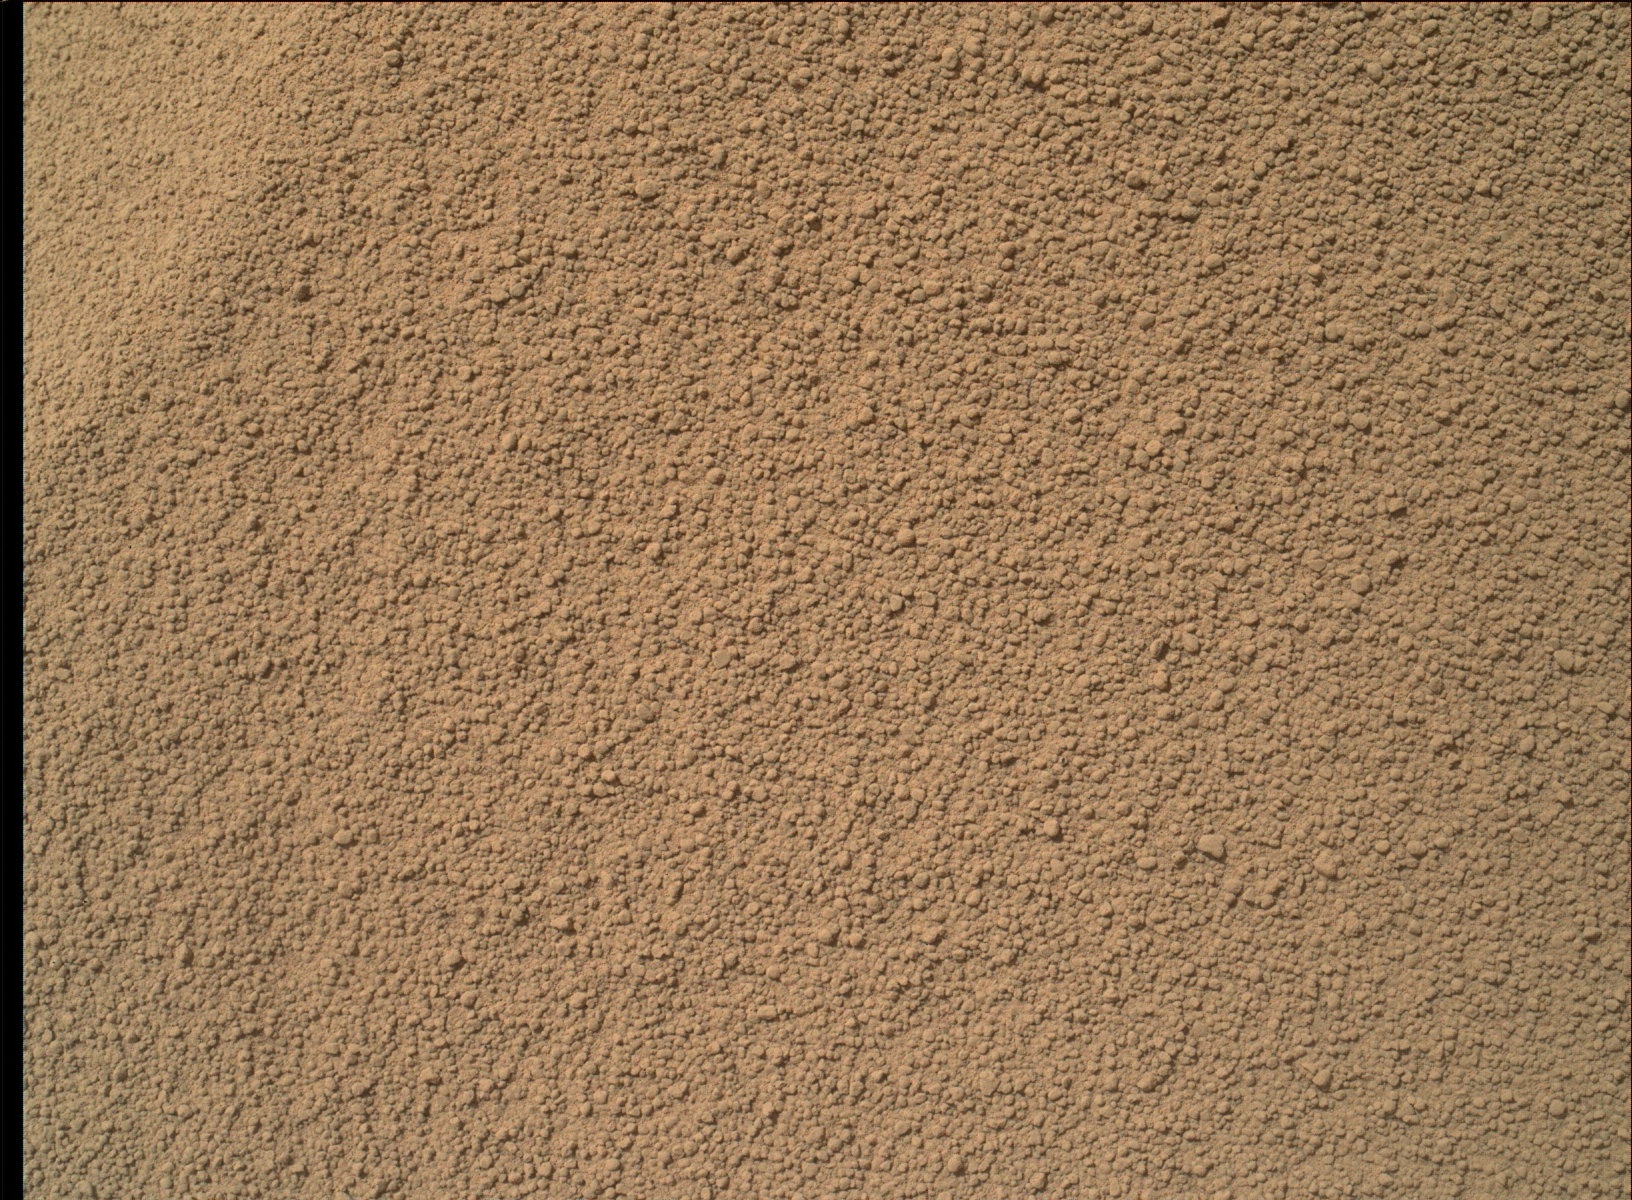 Nasa's Mars rover Curiosity acquired this image using its Mars Hand Lens Imager (MAHLI) on Sol 60